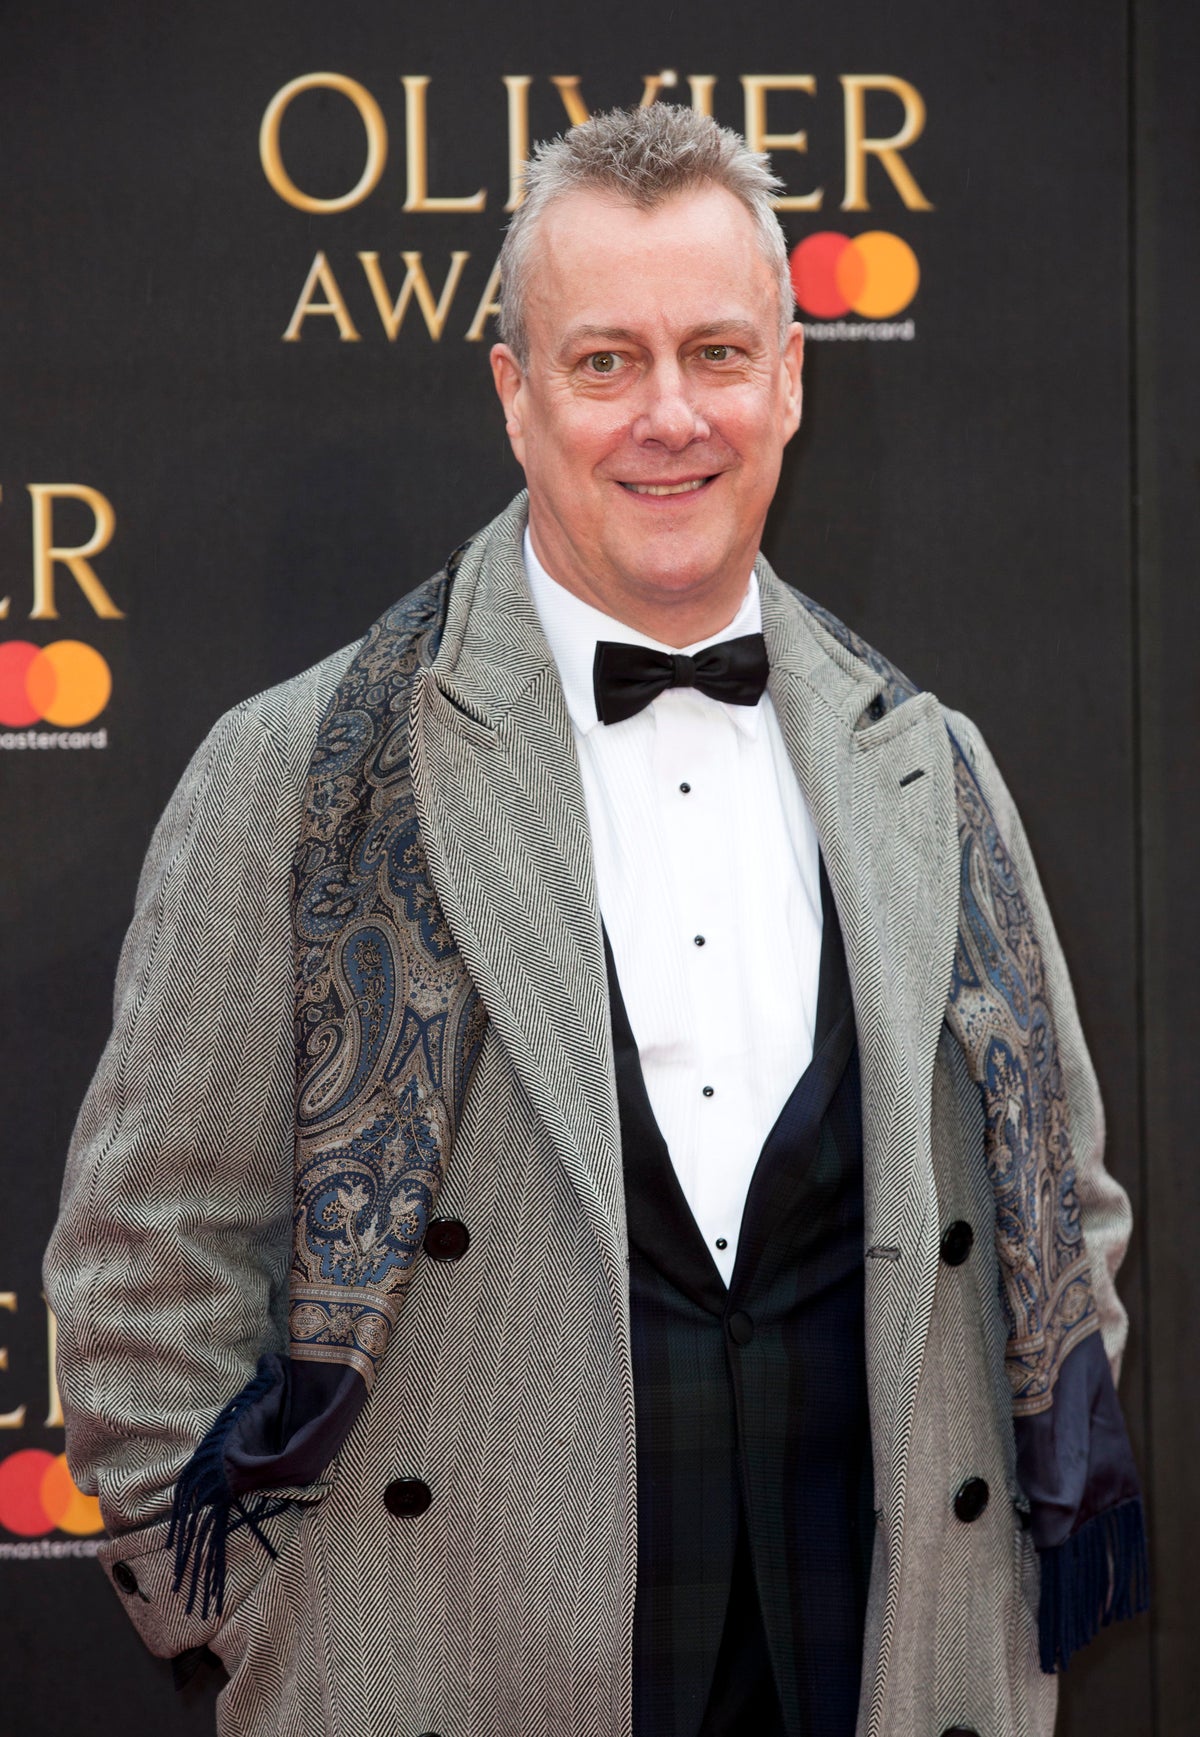 DCI Banks star Stephen Tompkinson to appear in court charged with inflicting GBH